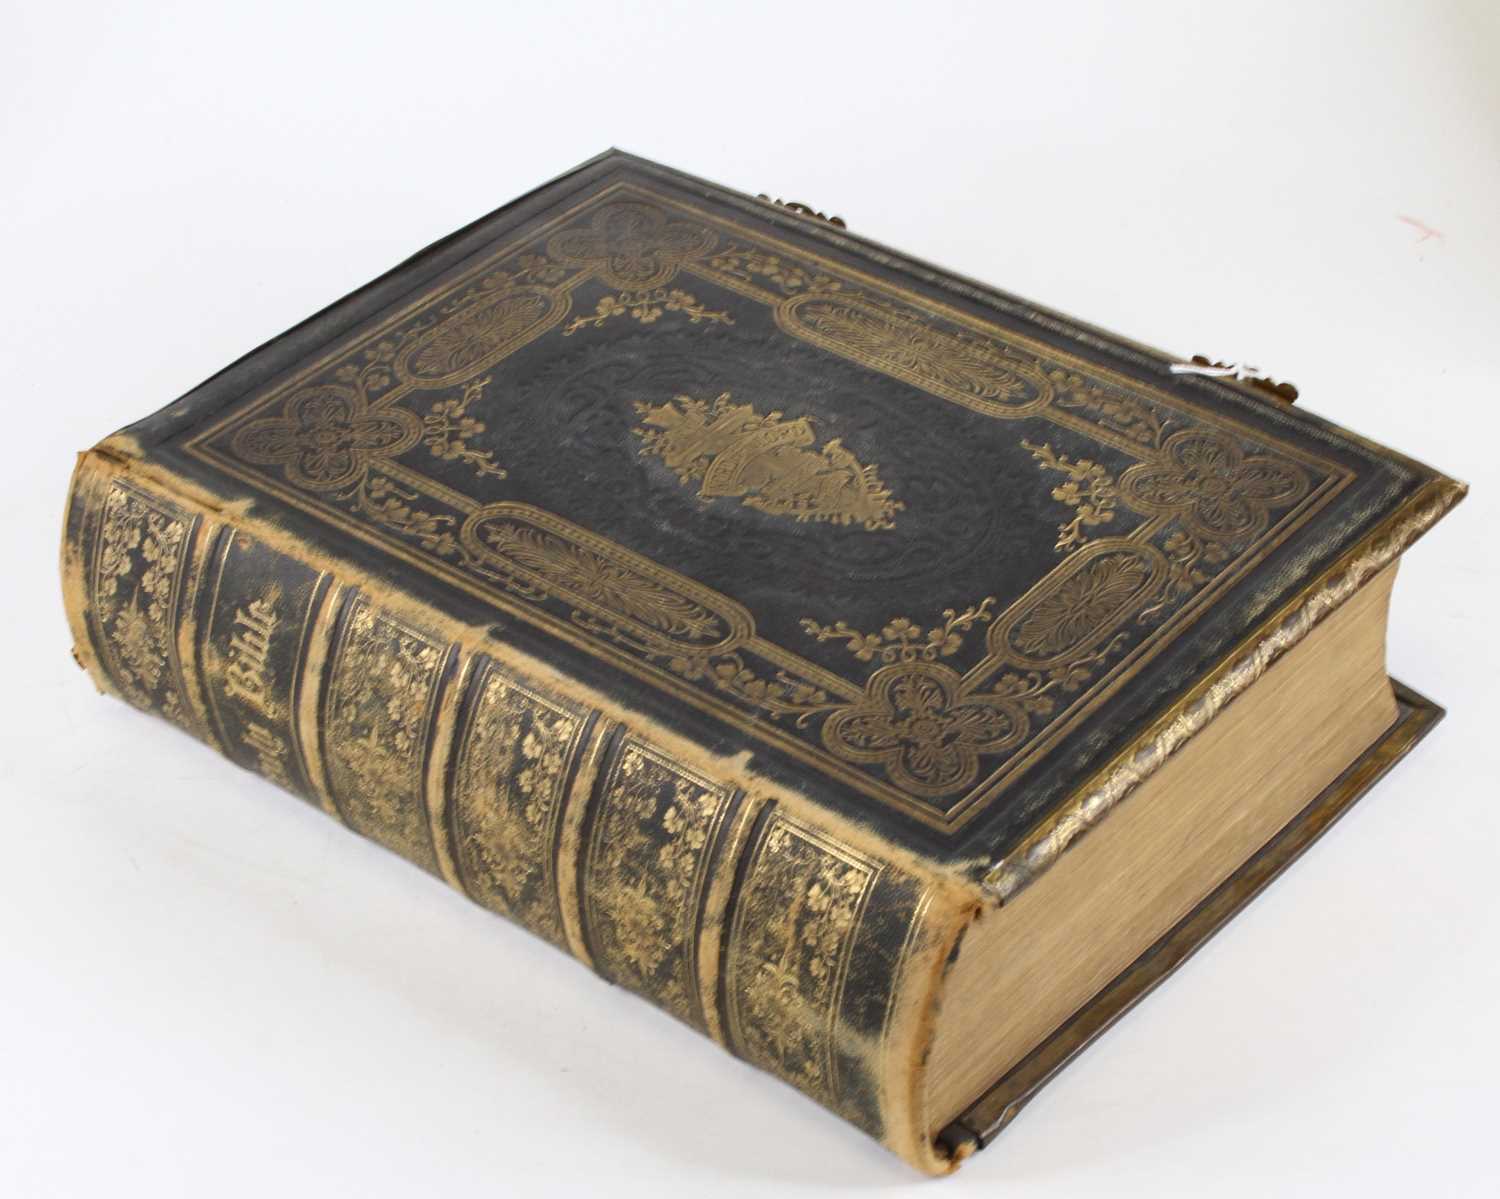 A Victorian family Bible, bound in gilt-tooled black leather